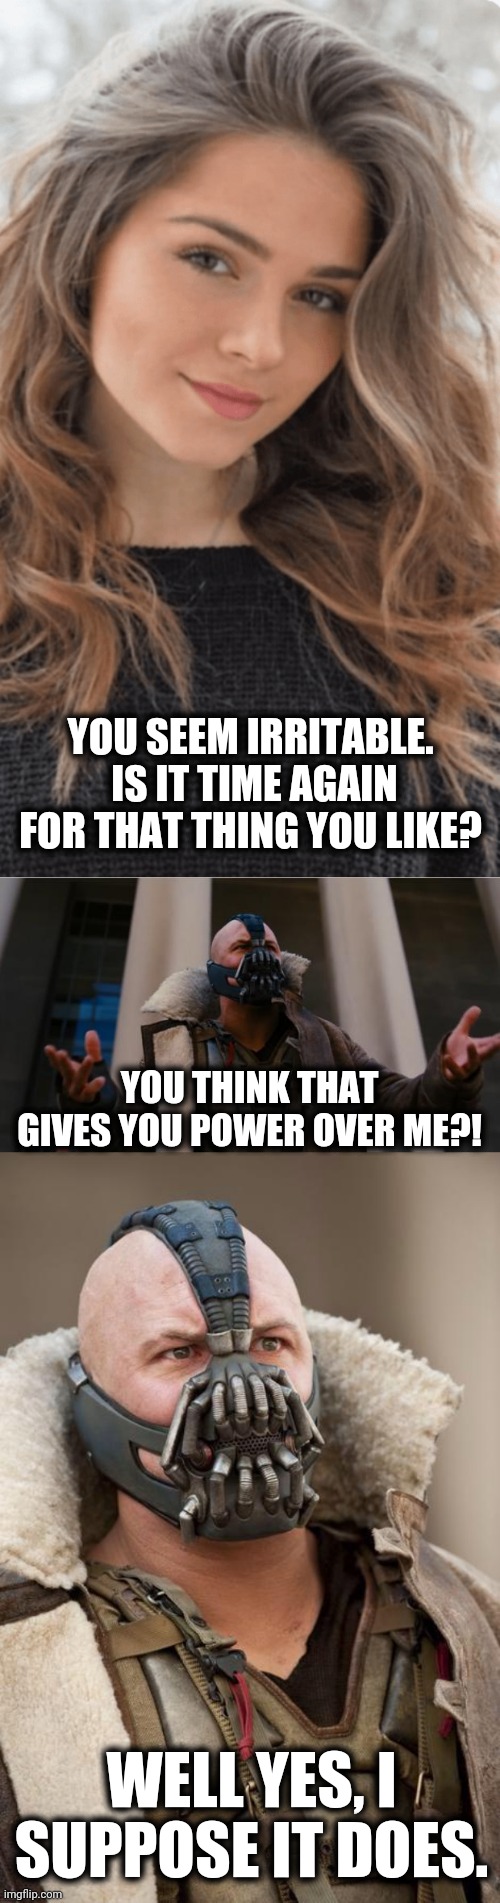 How the world works: | YOU SEEM IRRITABLE.  IS IT TIME AGAIN FOR THAT THING YOU LIKE? YOU THINK THAT GIVES YOU POWER OVER ME?! WELL YES, I SUPPOSE IT DOES. | image tagged in bane speech,bane,that thing you like,power over me | made w/ Imgflip meme maker